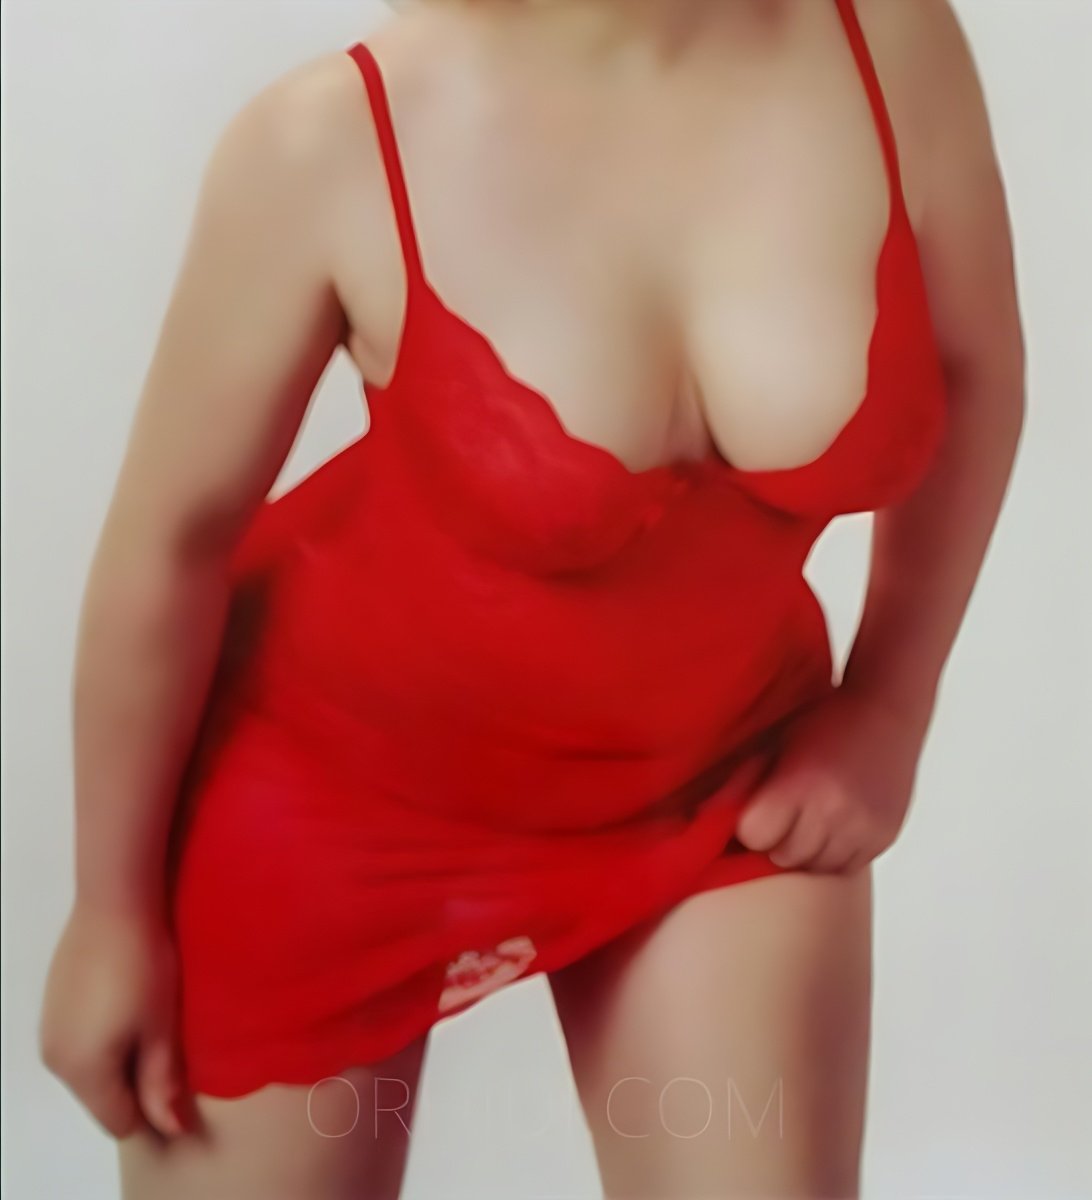 Find Escort Service in Regensburg and Enjoy Time With Pretty Girls - model photo MIMI